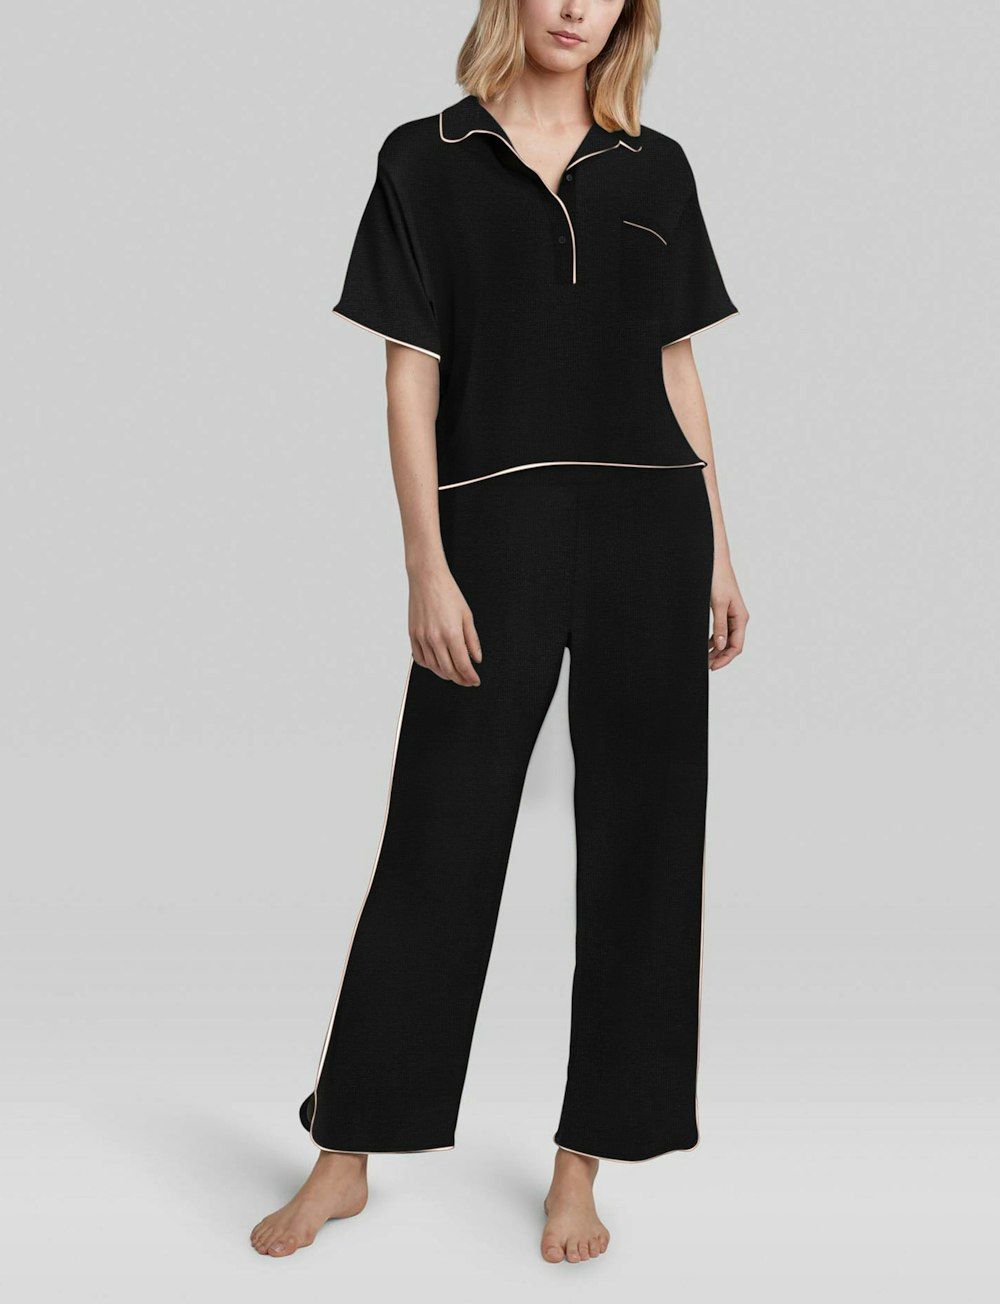 Women's Downtime Pullover Pajama Top & Pant Set | Tommy John